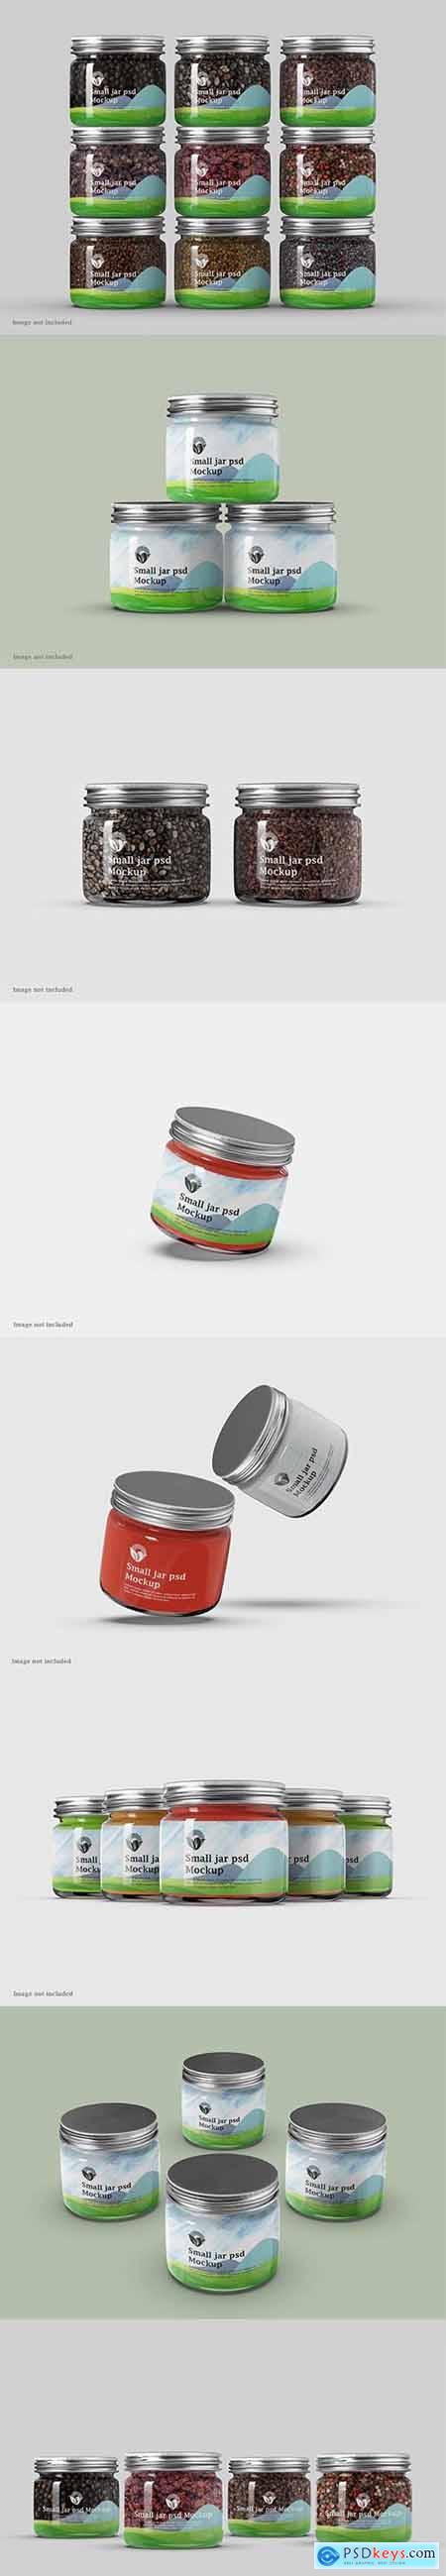 Small spices pickle or jelly jar mockup